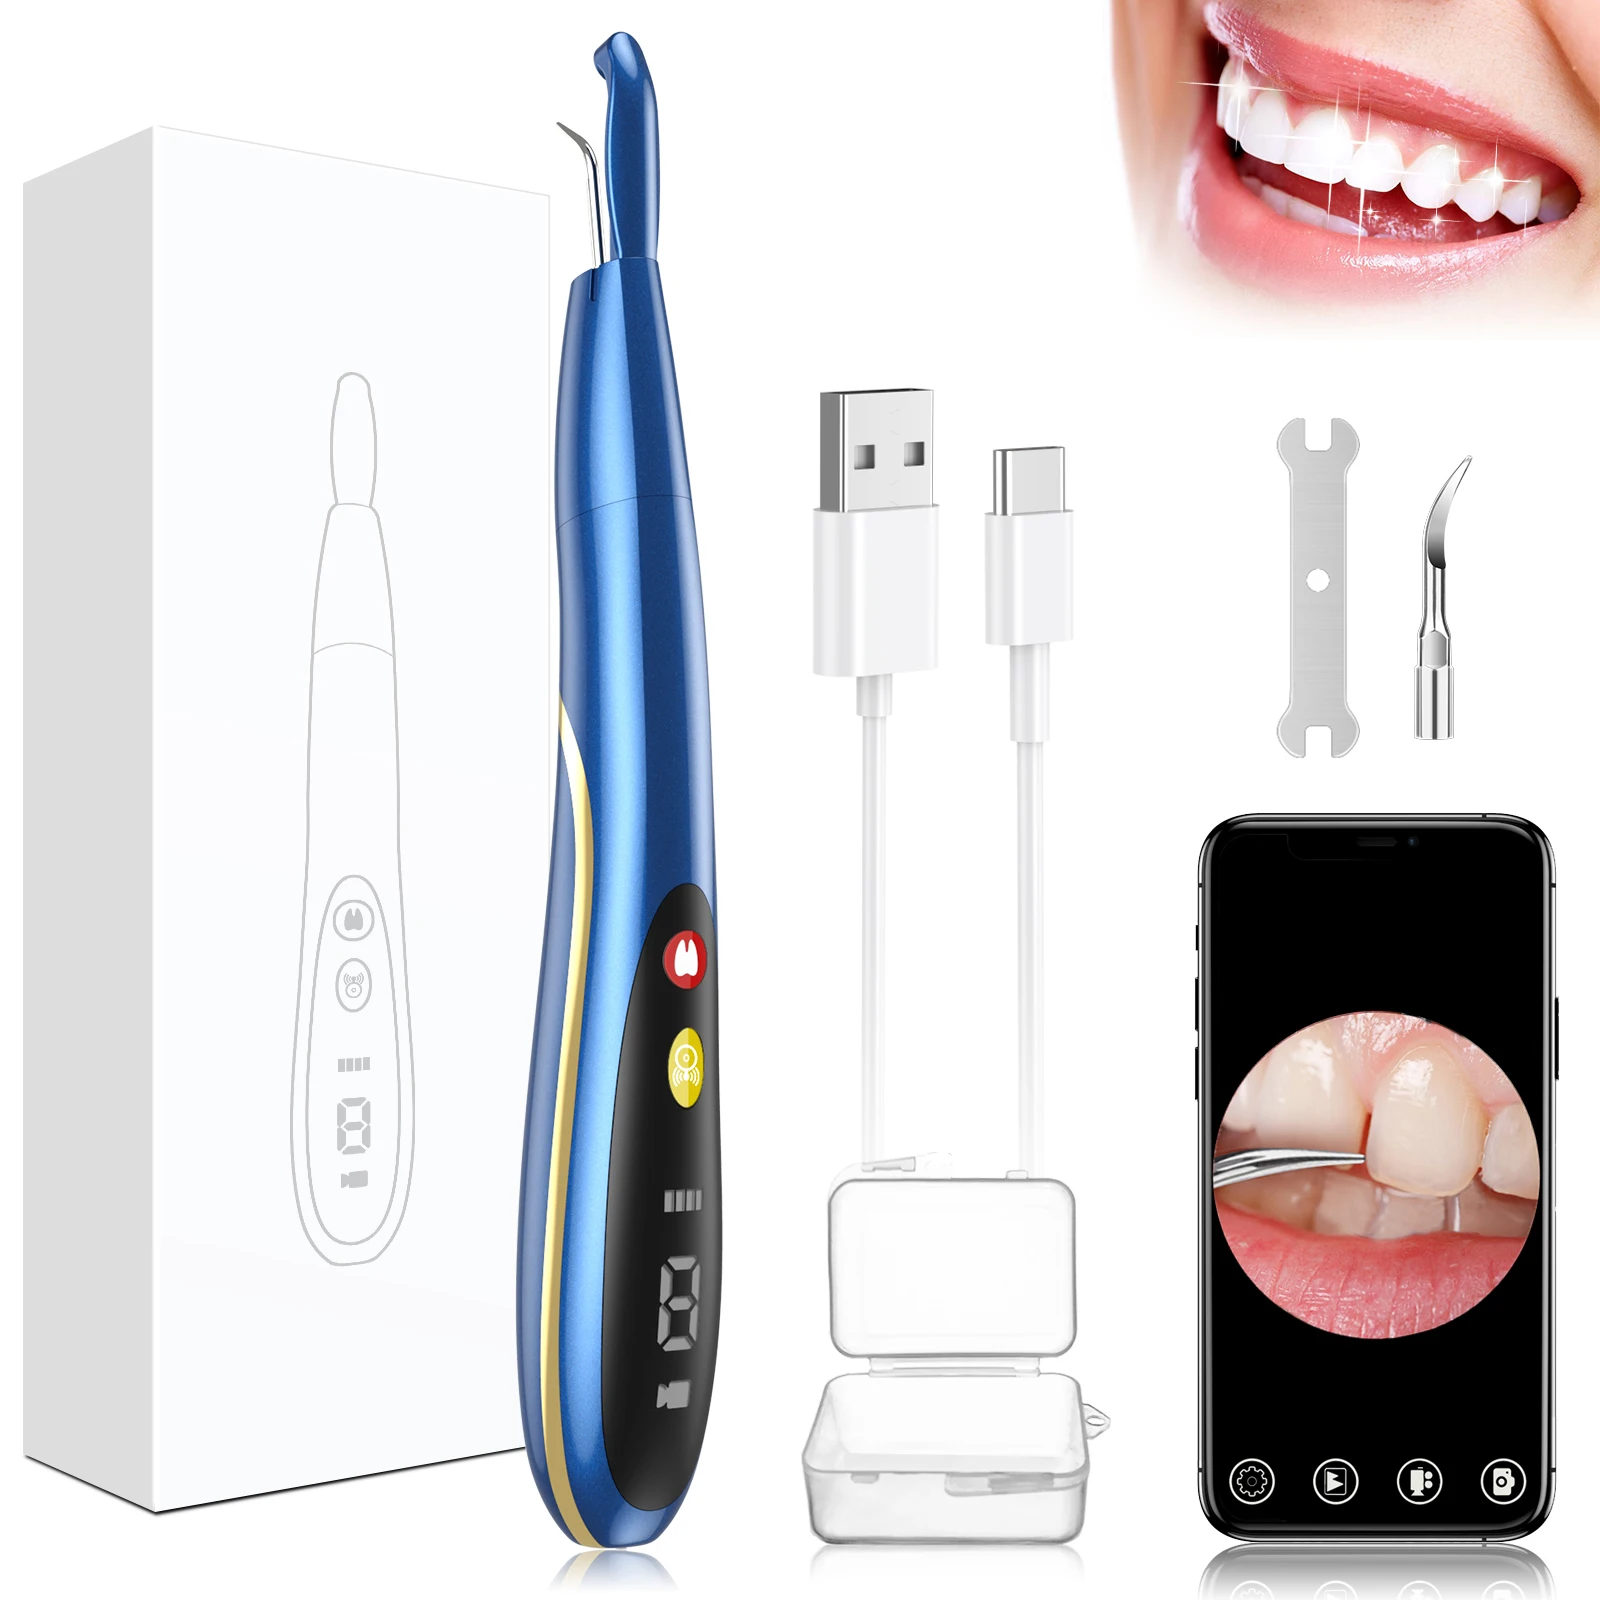 

Mini Visual Ultrasonic Tooth Cleaner Electric Sonic Dental Calculus Scaler Tartar Remover Plaque Stains Cleaning Teeth Whitening